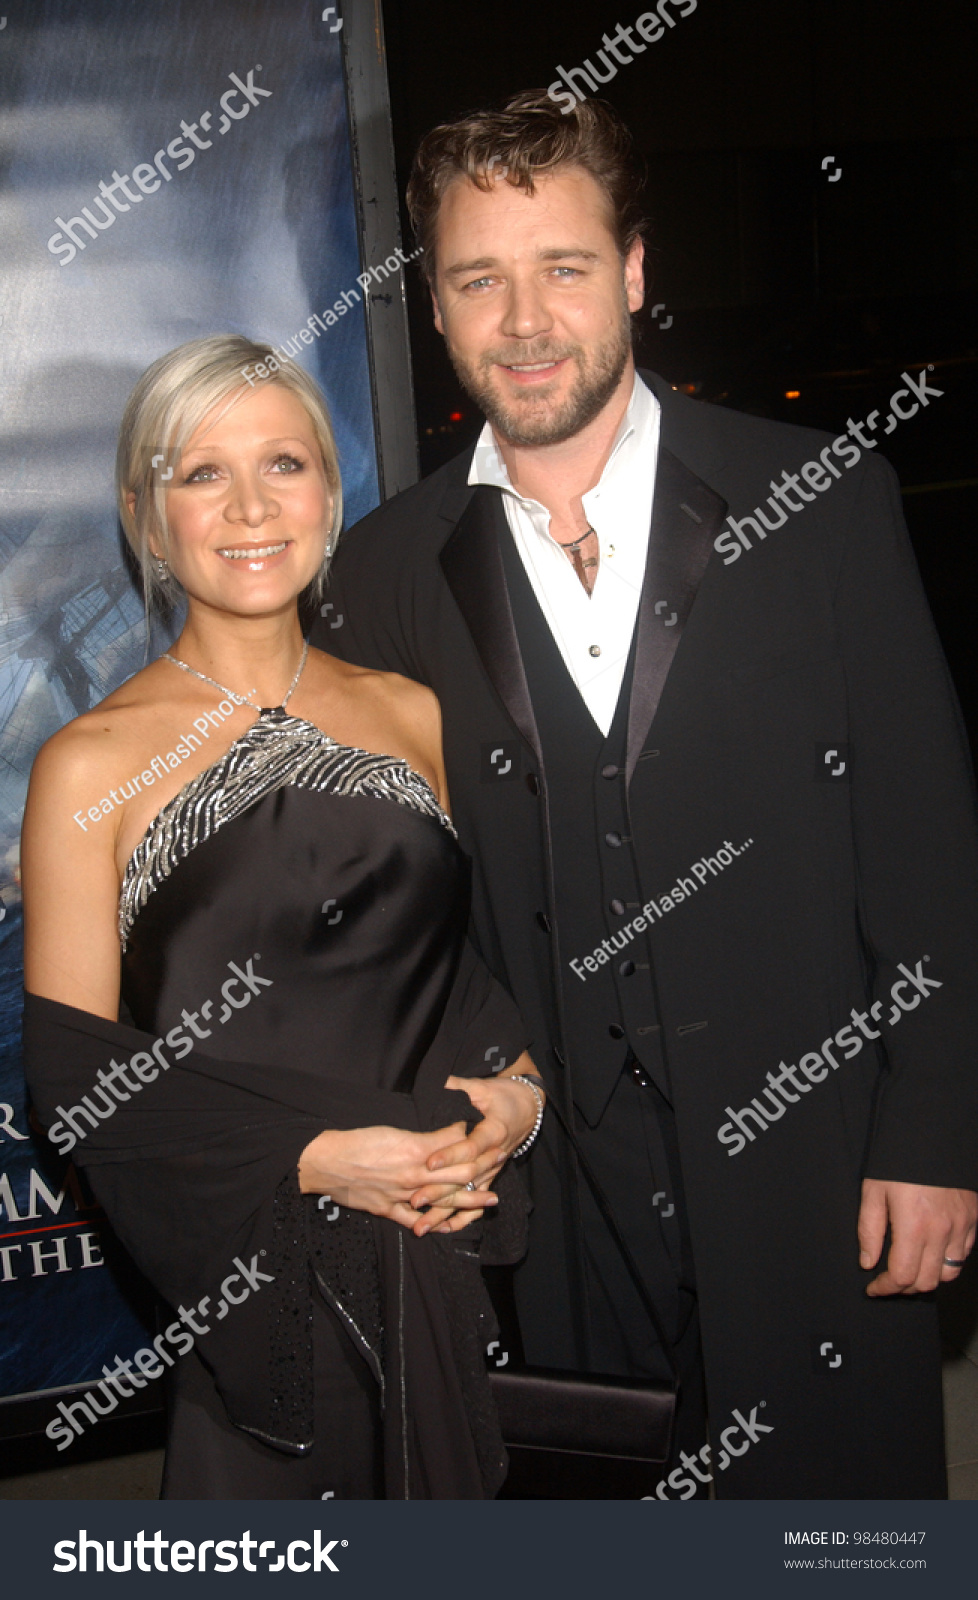 Pictures danielle spencer Russell Crowe's